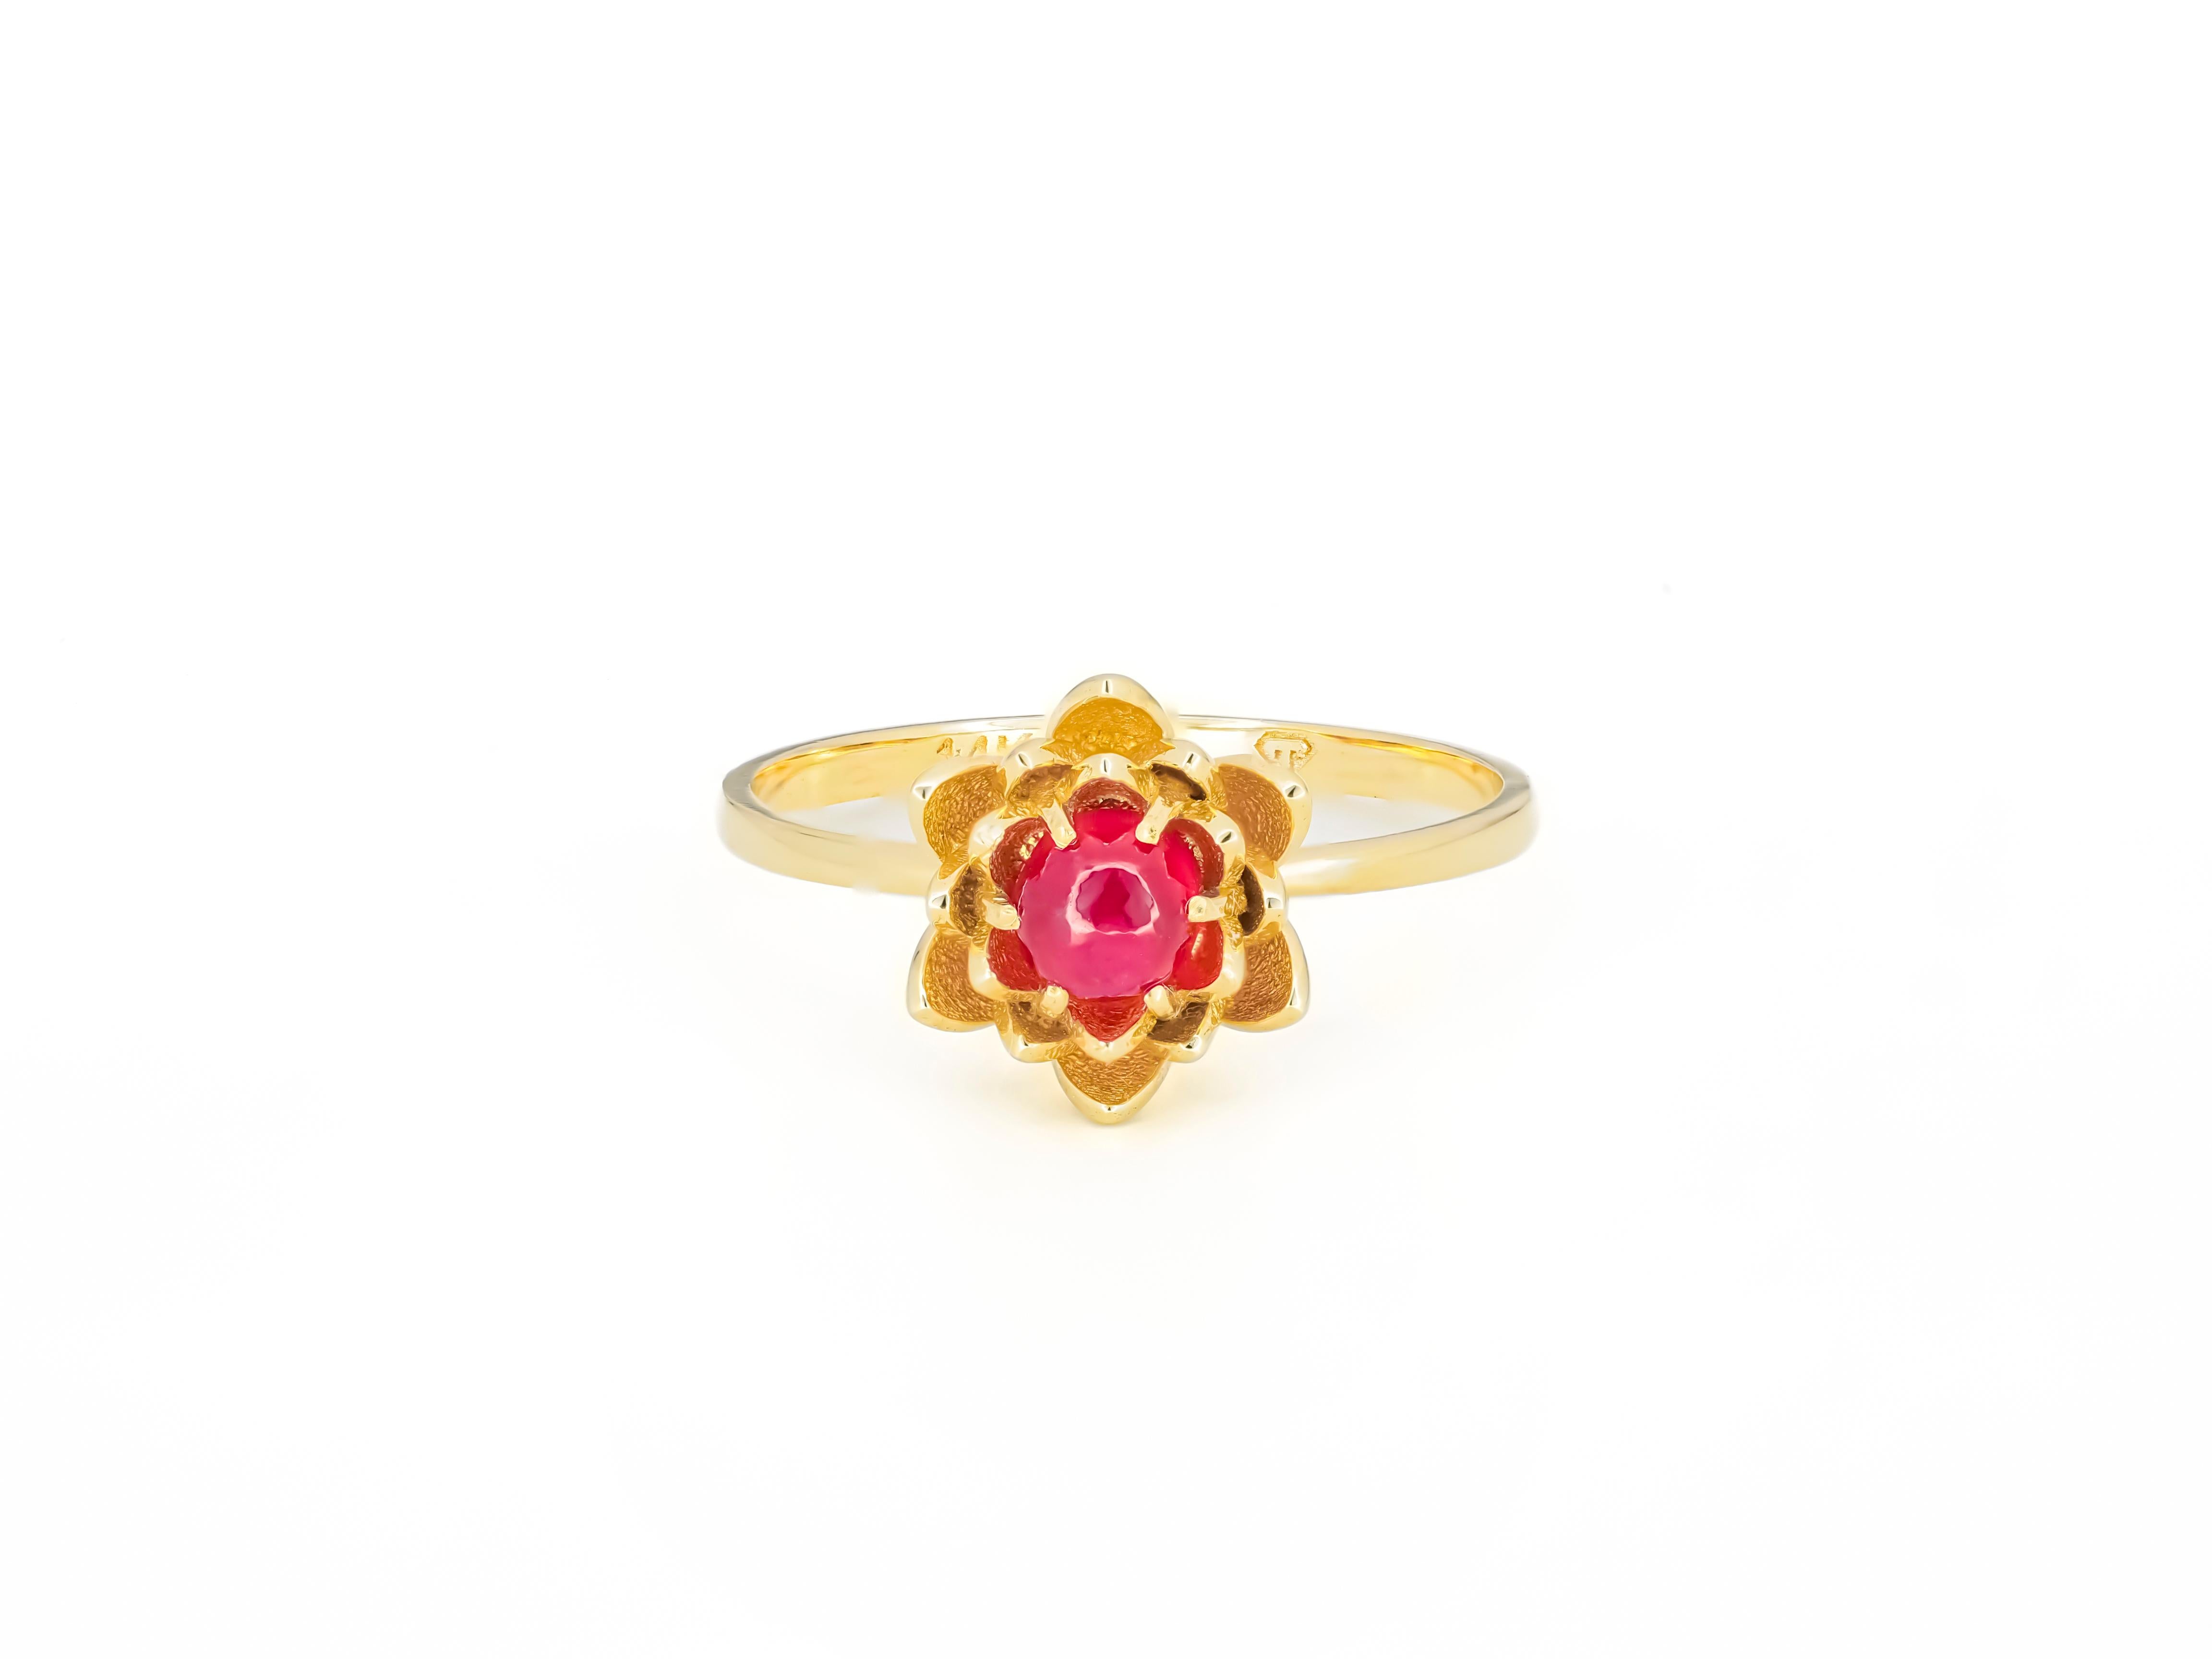 Ruby gold ring in 14k gold. Lotus flower ring. Ruby cabochon ring. Round ruby ring. By Daizy Jewellery.

metal: 14k solid gold
weigh: 2.2 gr (depends from size)

Central stone: Ruby
Weight: 0.5 ct. (4.5 mm)
Pinkish red color, round cabochon